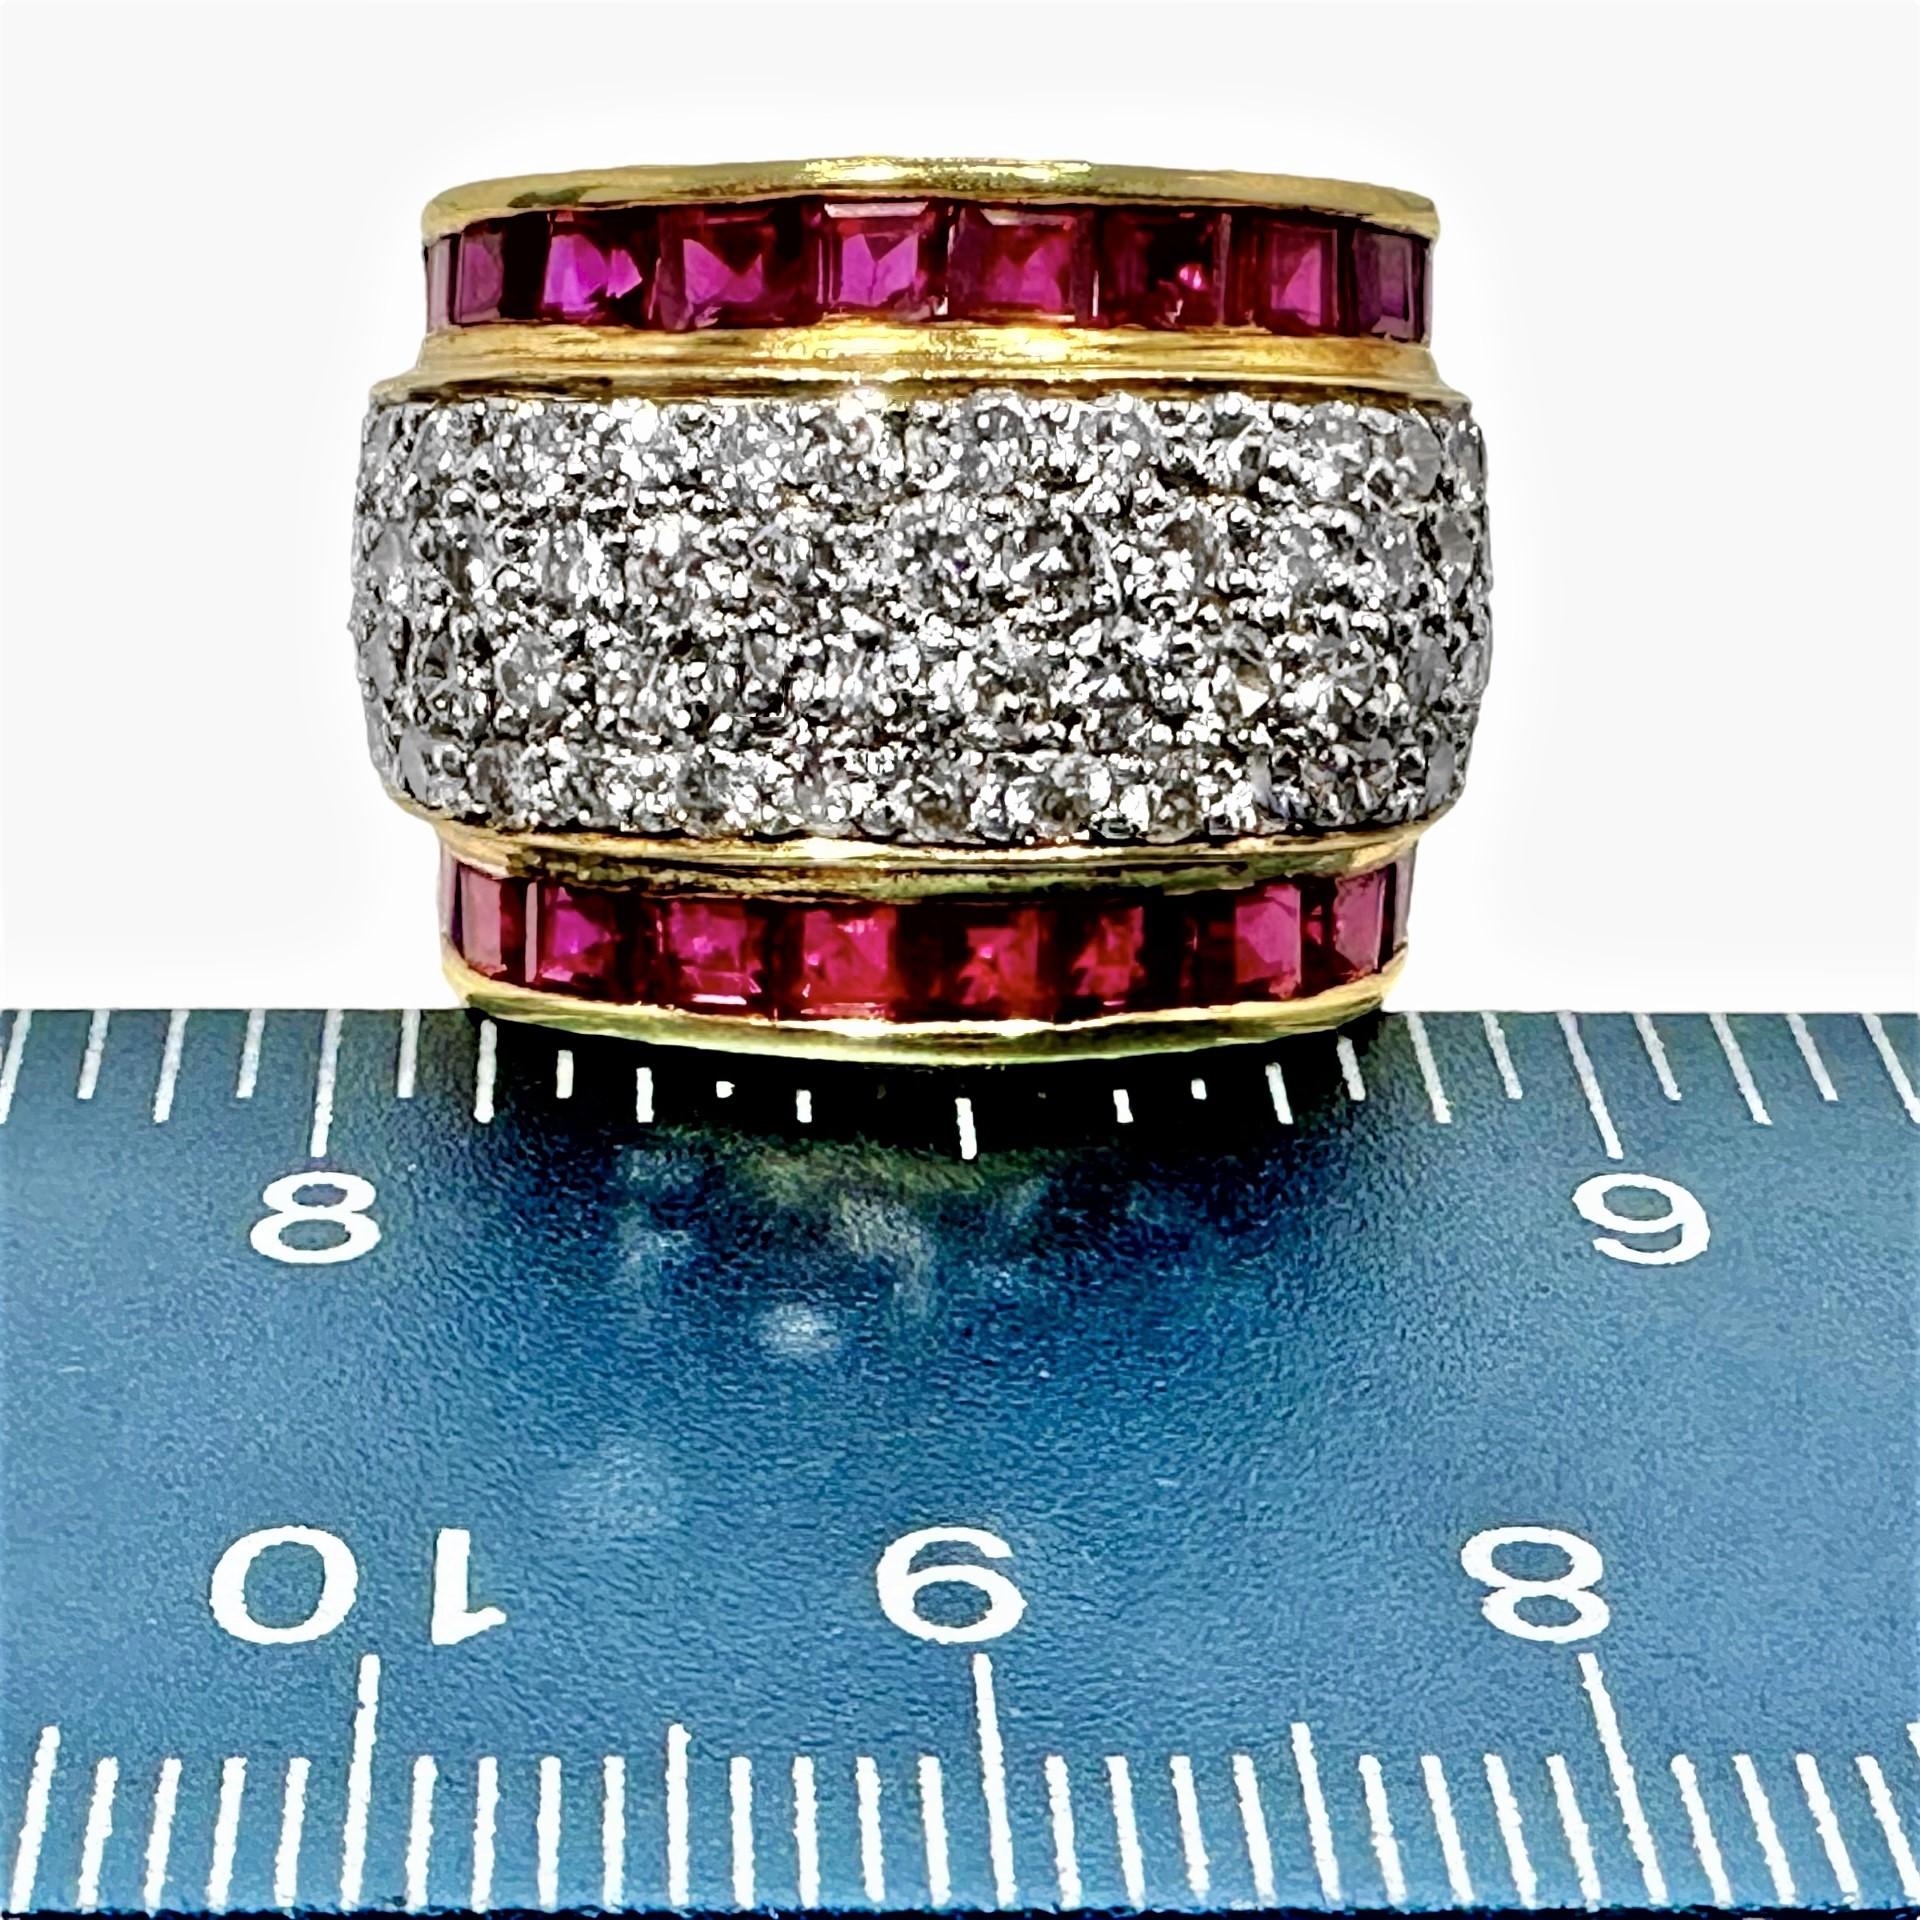 Wide and Tailored 18k Gold Band Ring with Diamonds and Vivid Rubies For Sale 4